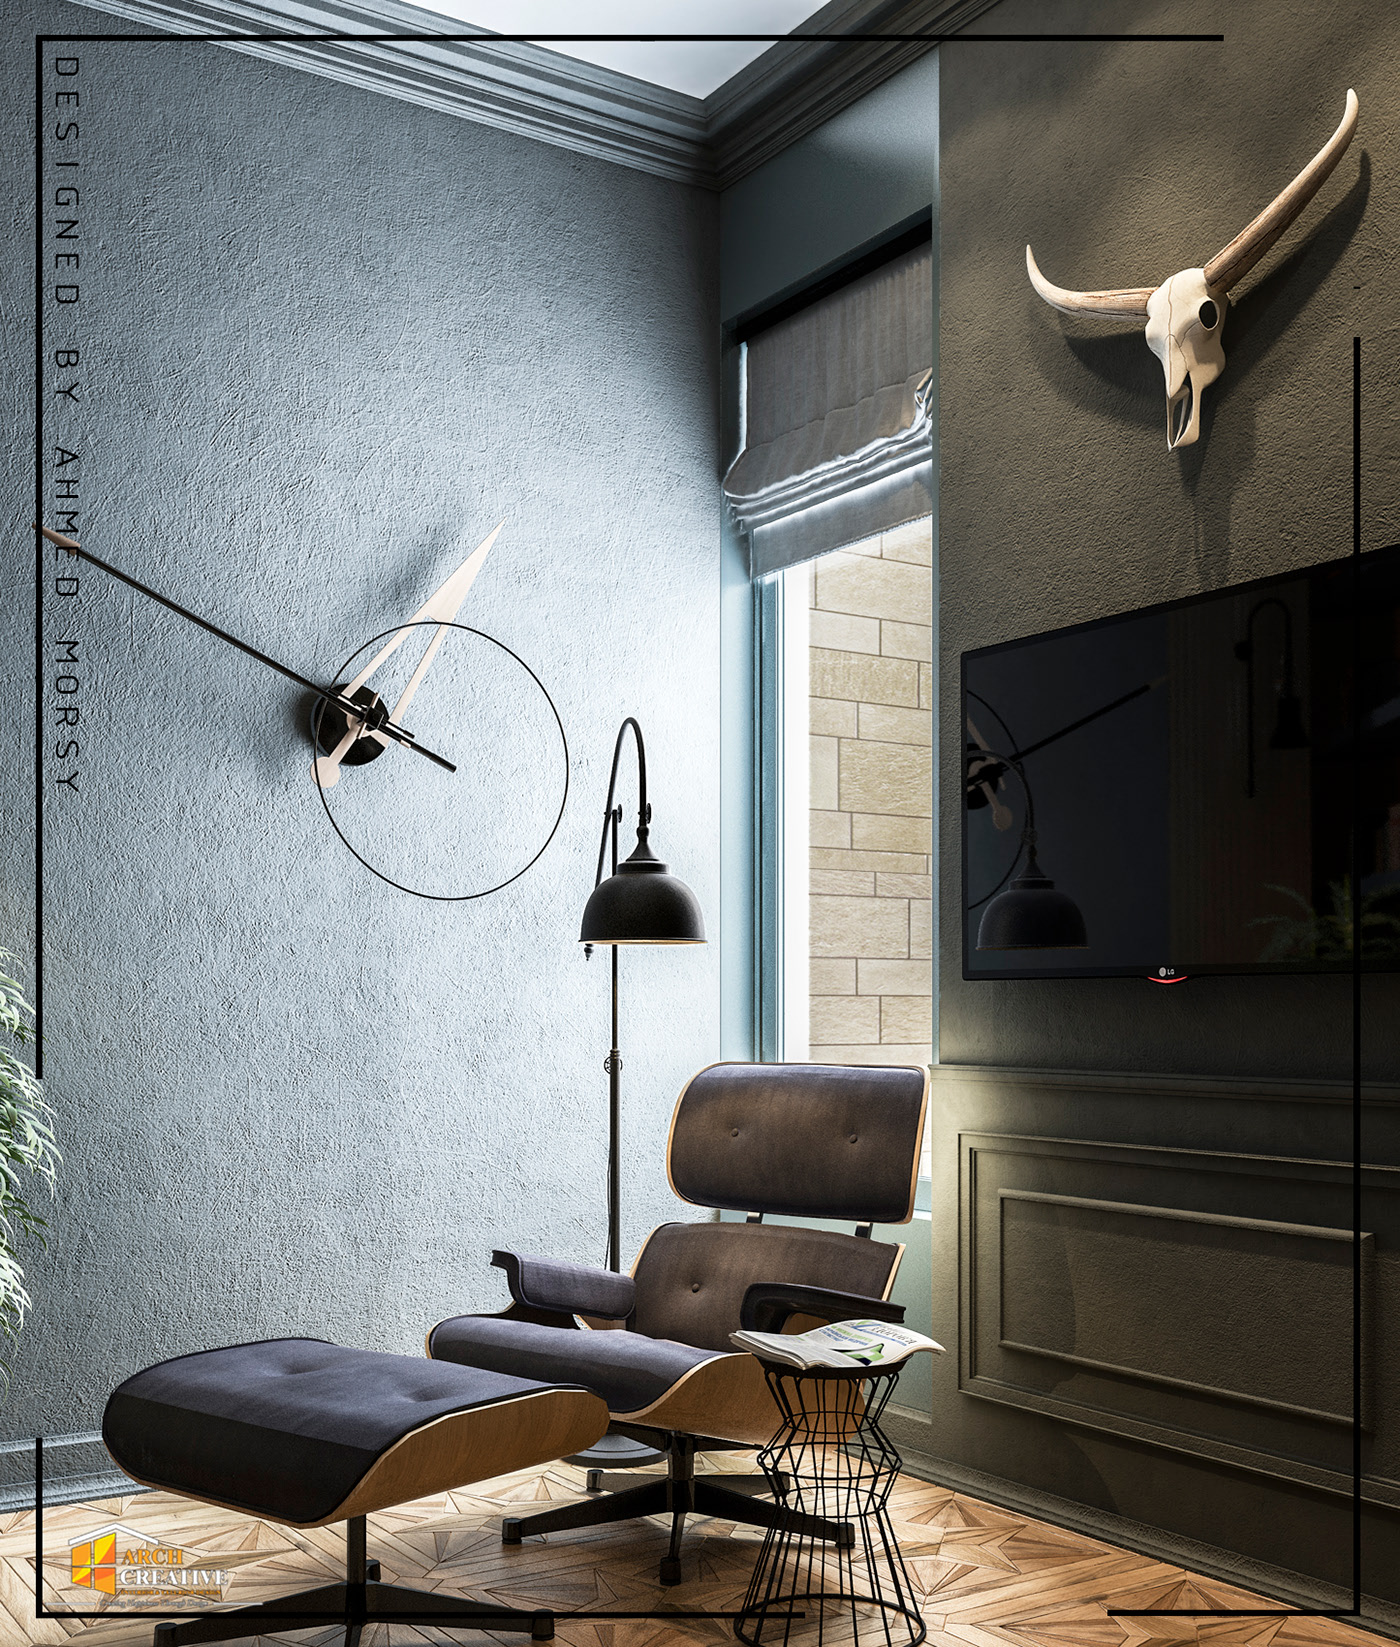 Private office room on Behance
